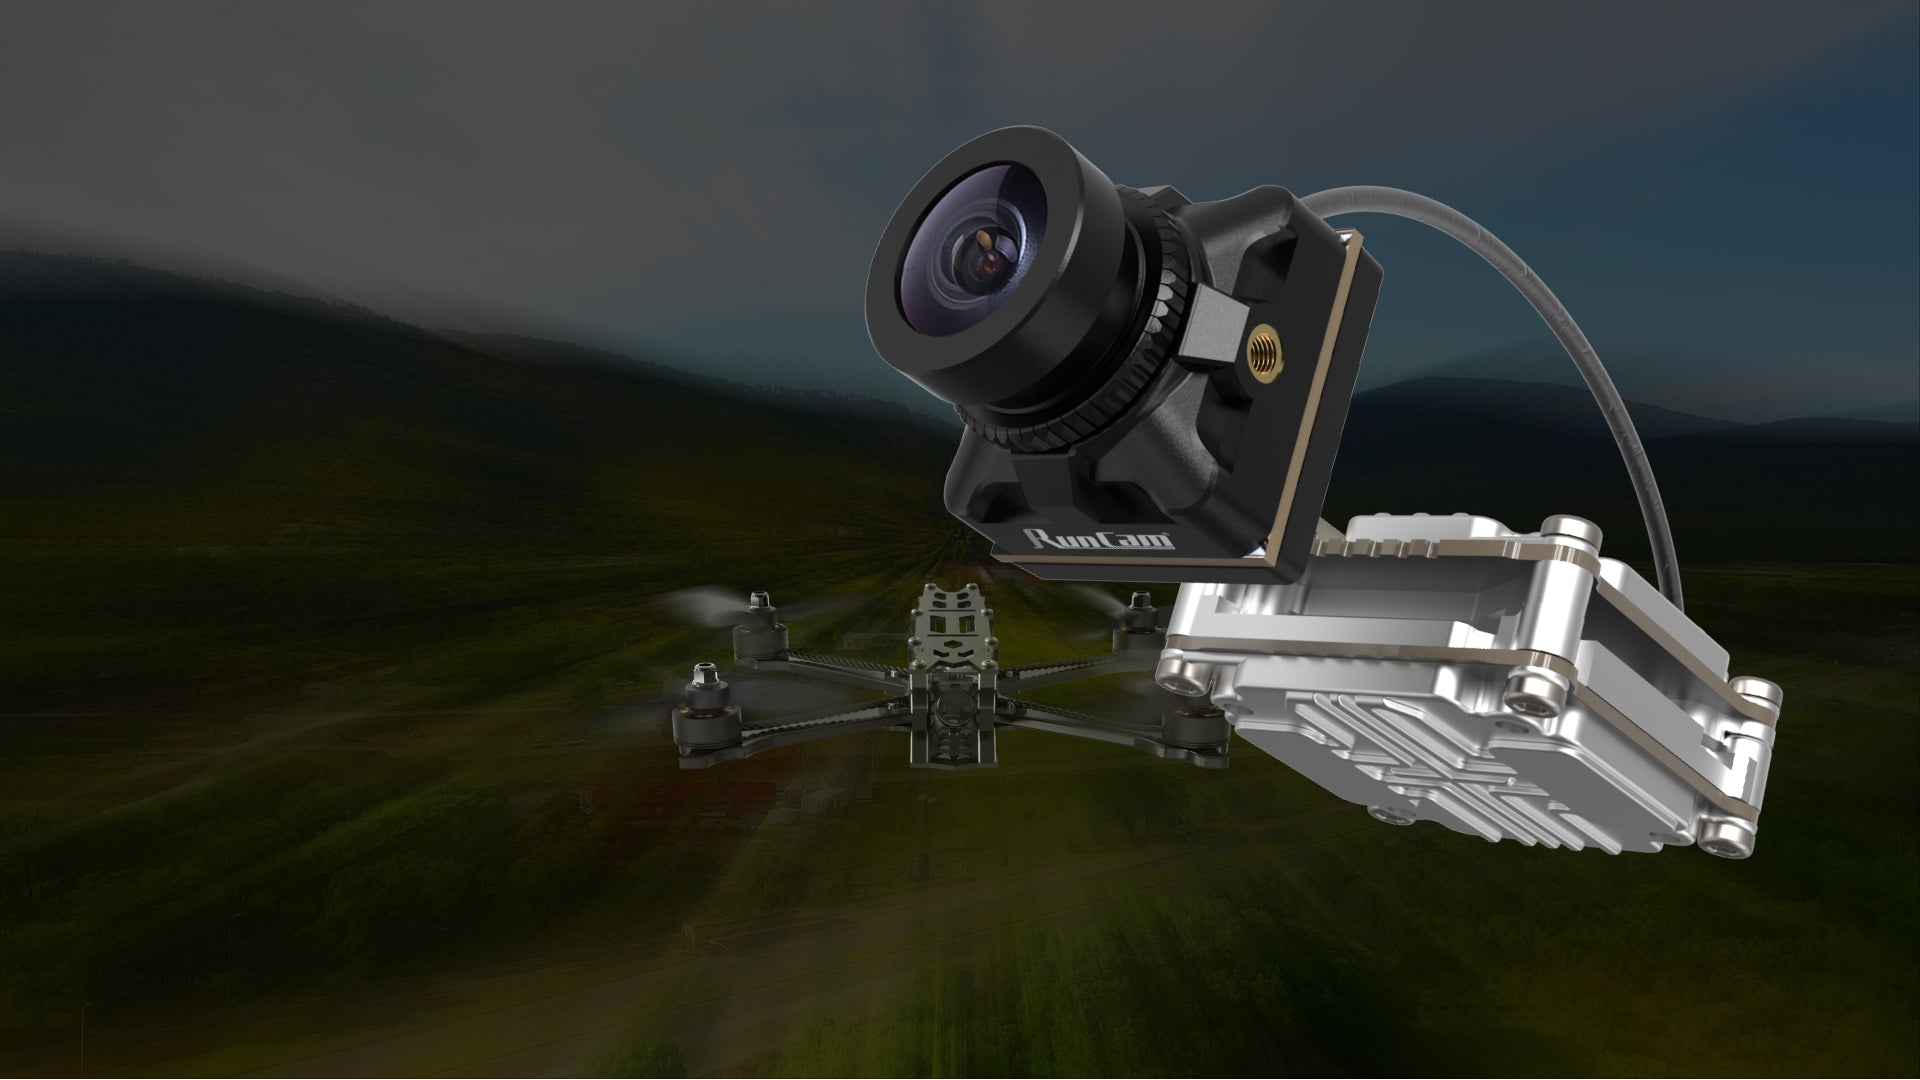 RunCam Link MIPI HD Kit, this reduces flight preparation time significantly